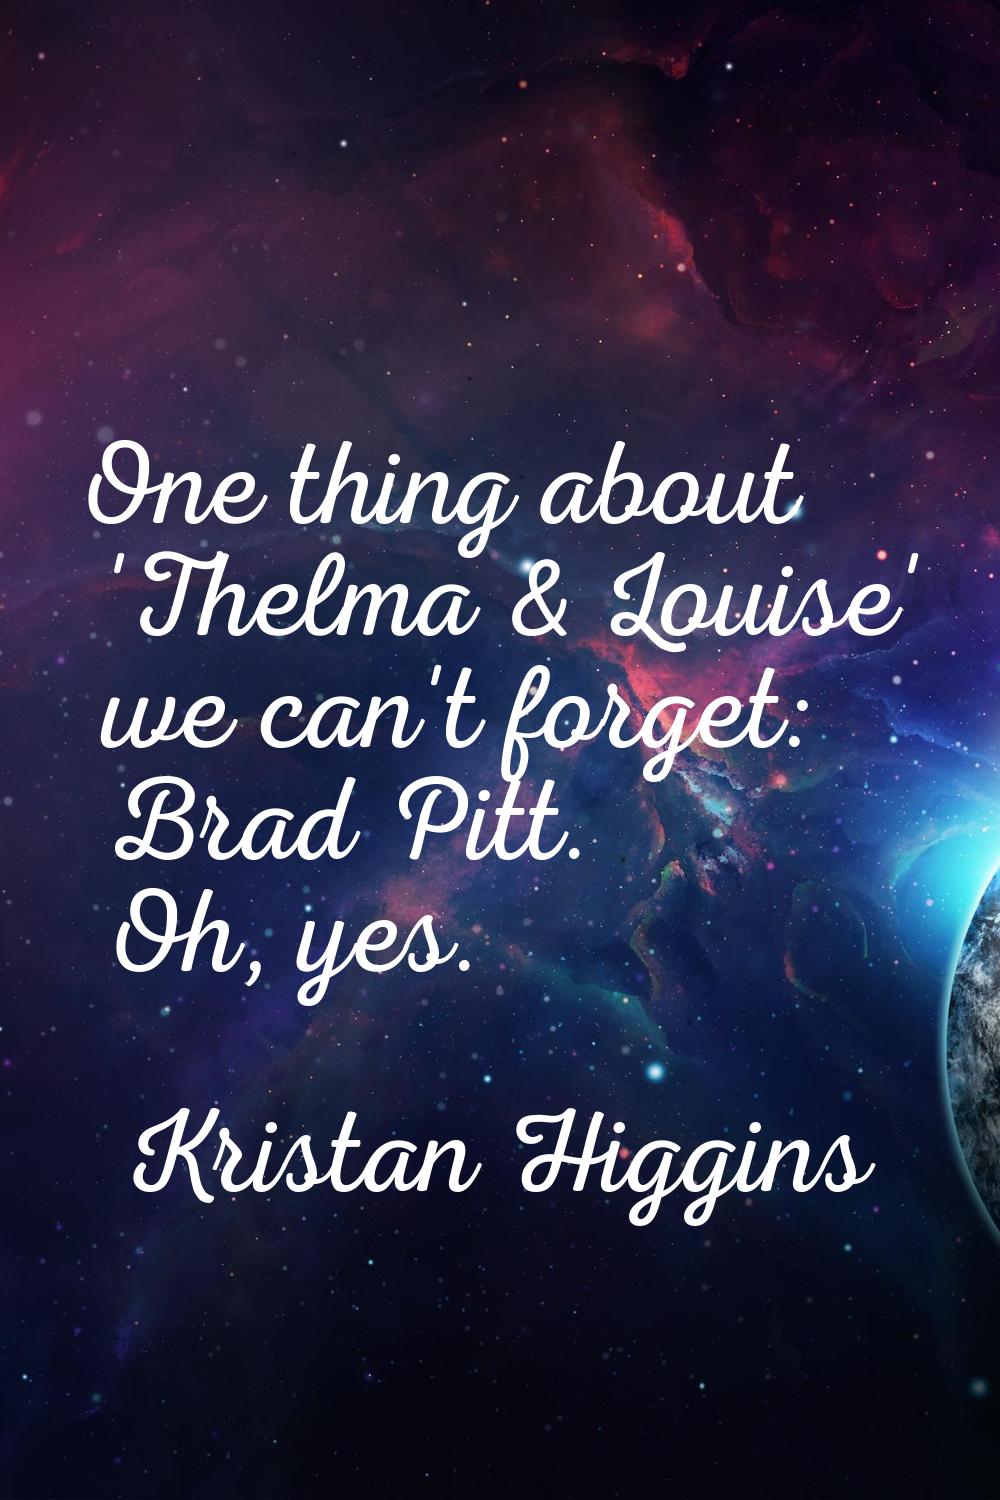 One thing about 'Thelma & Louise' we can't forget: Brad Pitt. Oh, yes.